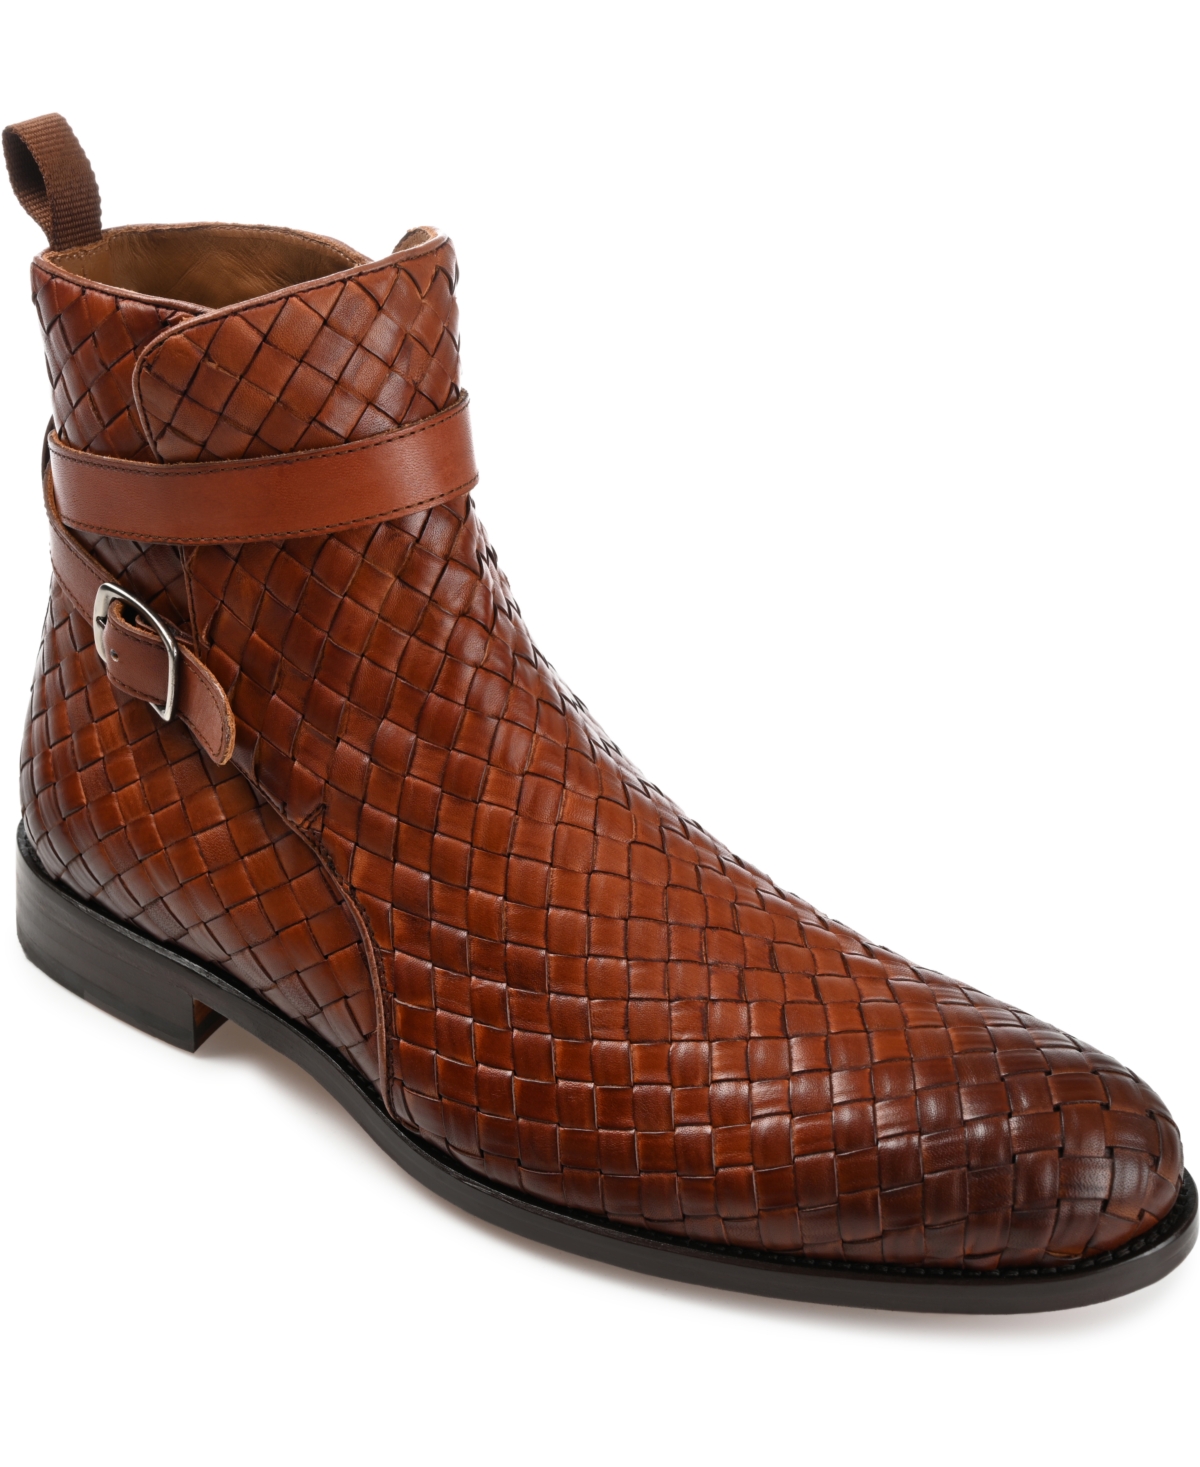 Men's Dylan Hand-Woven Leather Buckle Jodhpur Boots - Brown Woven